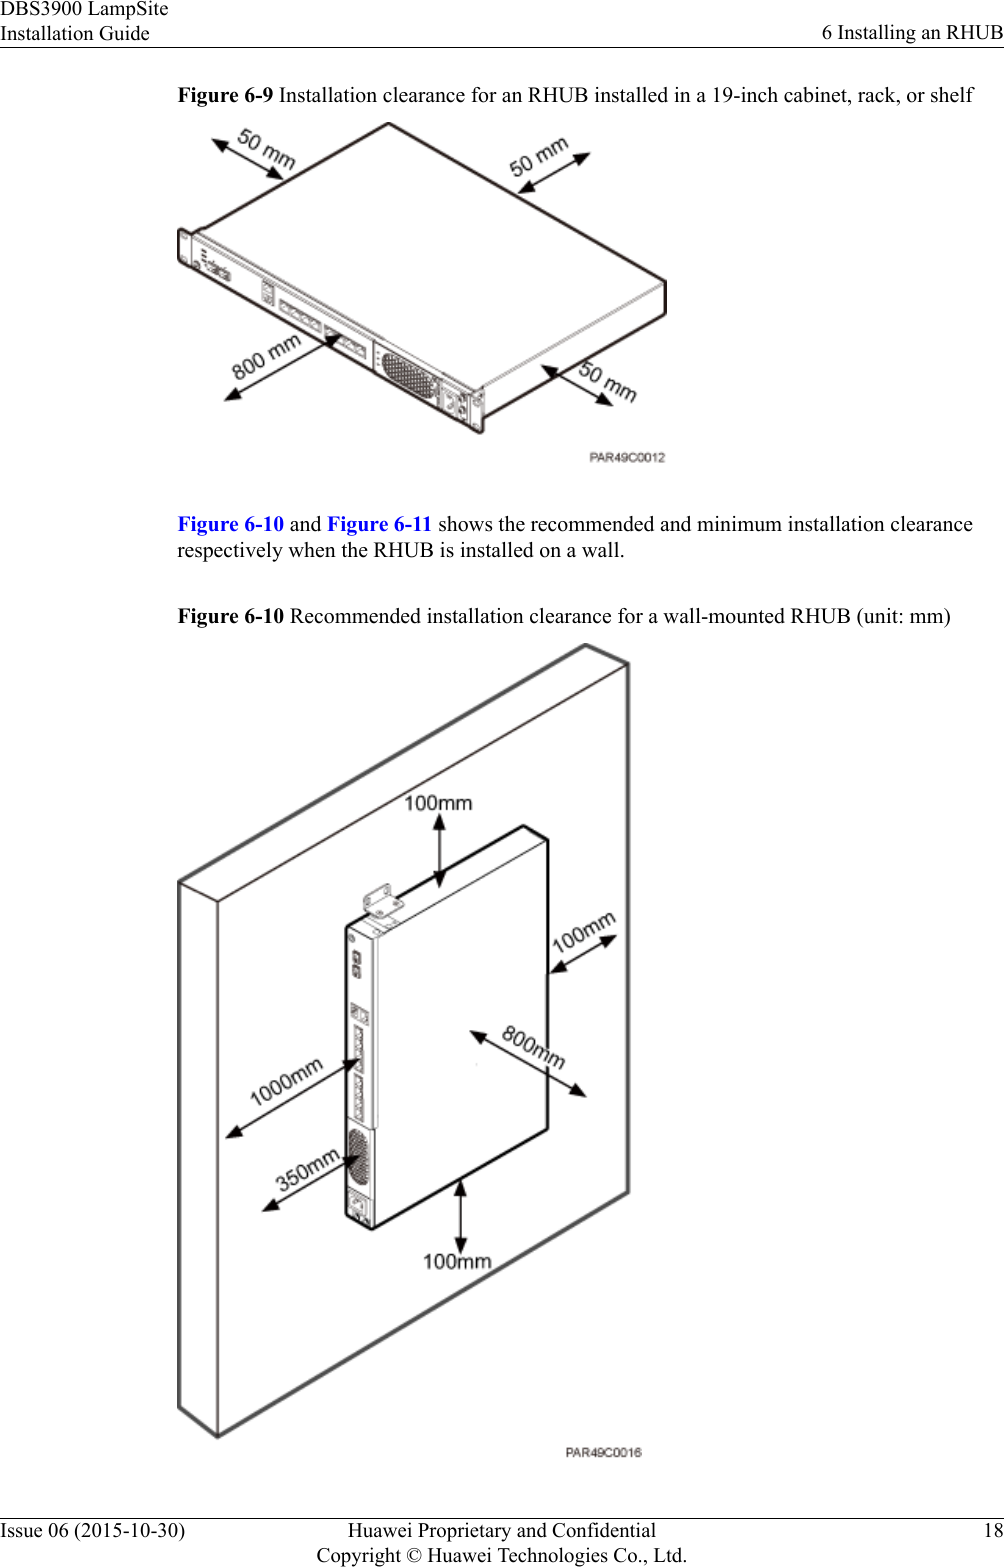 Figure 6-9 Installation clearance for an RHUB installed in a 19-inch cabinet, rack, or shelfFigure 6-10 and Figure 6-11 shows the recommended and minimum installation clearancerespectively when the RHUB is installed on a wall.Figure 6-10 Recommended installation clearance for a wall-mounted RHUB (unit: mm)DBS3900 LampSiteInstallation Guide 6 Installing an RHUBIssue 06 (2015-10-30) Huawei Proprietary and ConfidentialCopyright © Huawei Technologies Co., Ltd.18